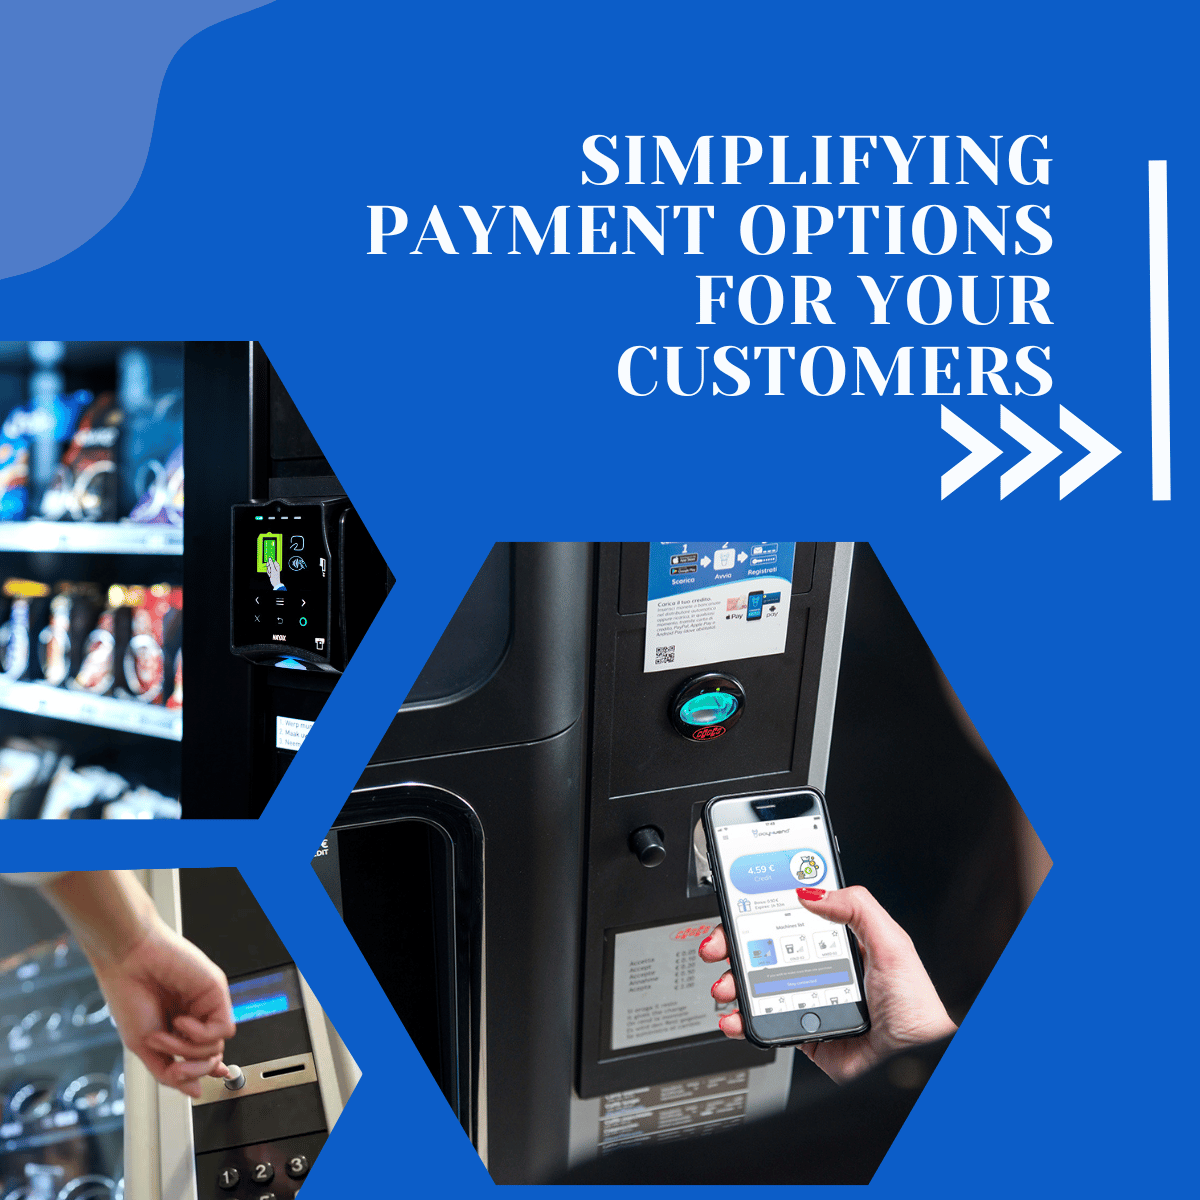 SIMPLIFYING PAYMENT OPTIONS FOR YOUR CUSTOMERS